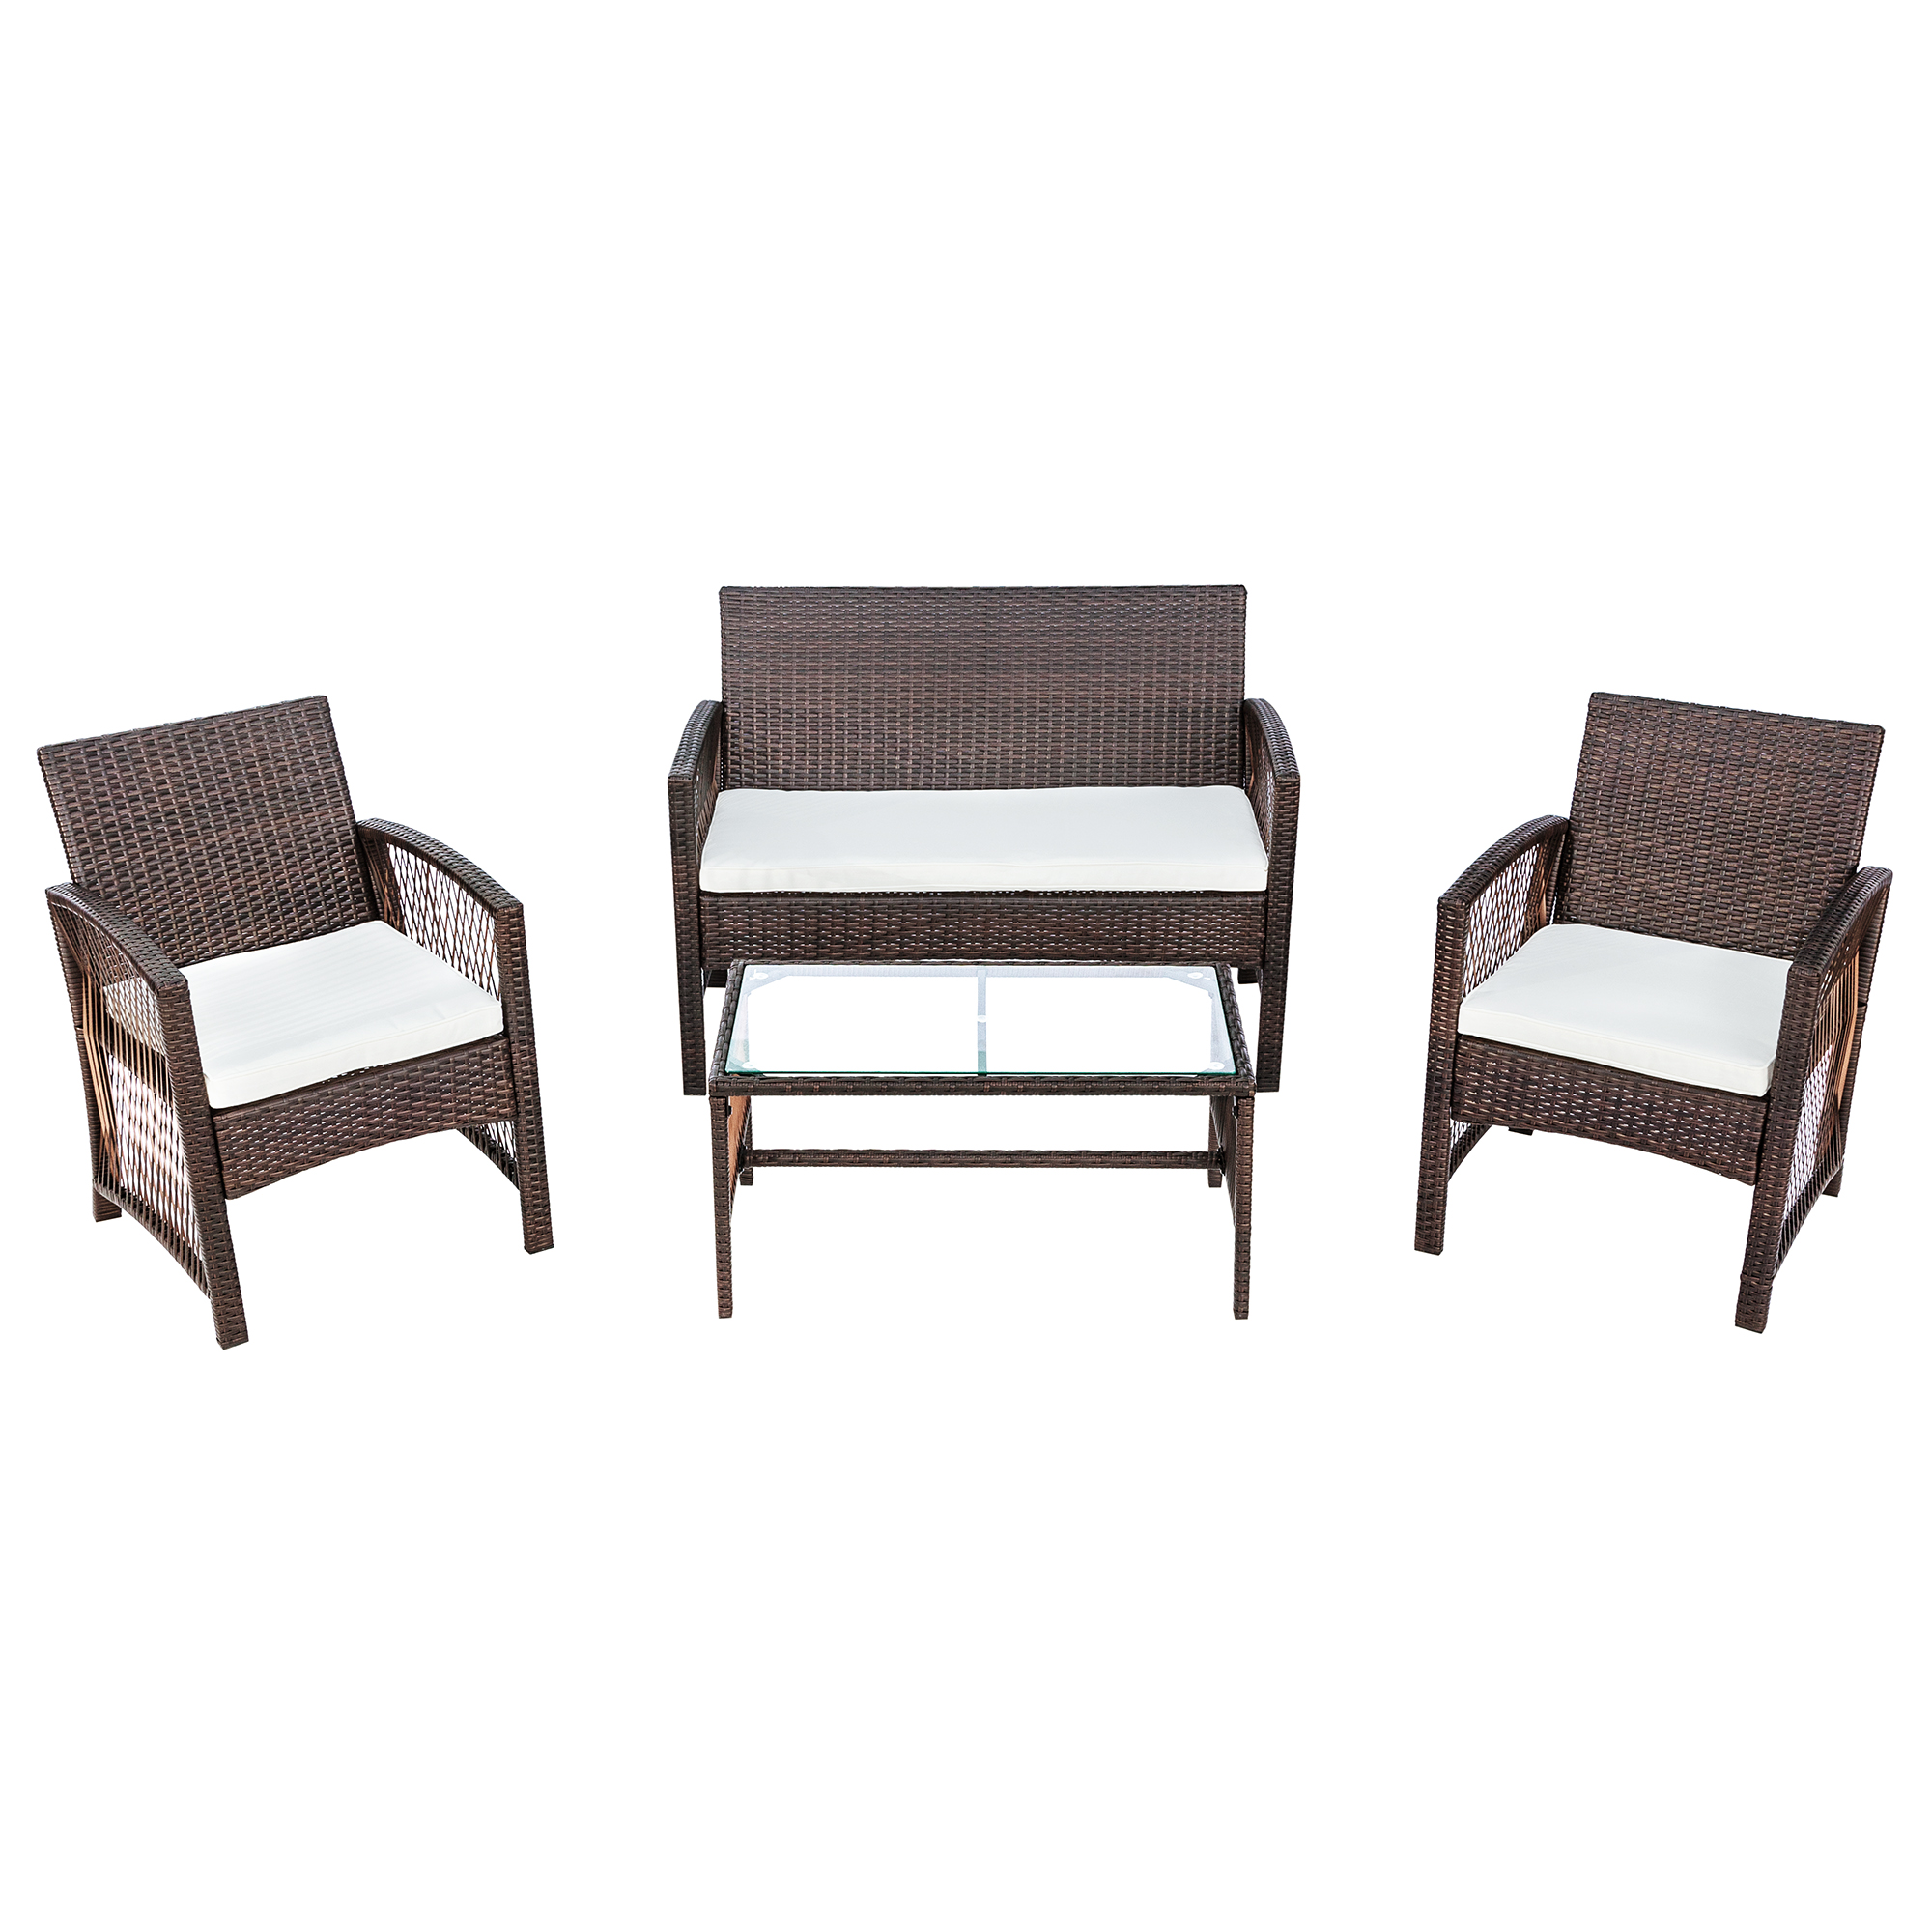 Outdoor Patio Furniture Sets, 4 Piece Brown Wicker Outdoor Porch Conversation Sets, 2pcs Arm Chairs, 1pc Loveseat&Coffee Table, Patio Bar Set, Dining Set for Backyard Lawn Porch Poolside Garden, W7755 - image 4 of 12